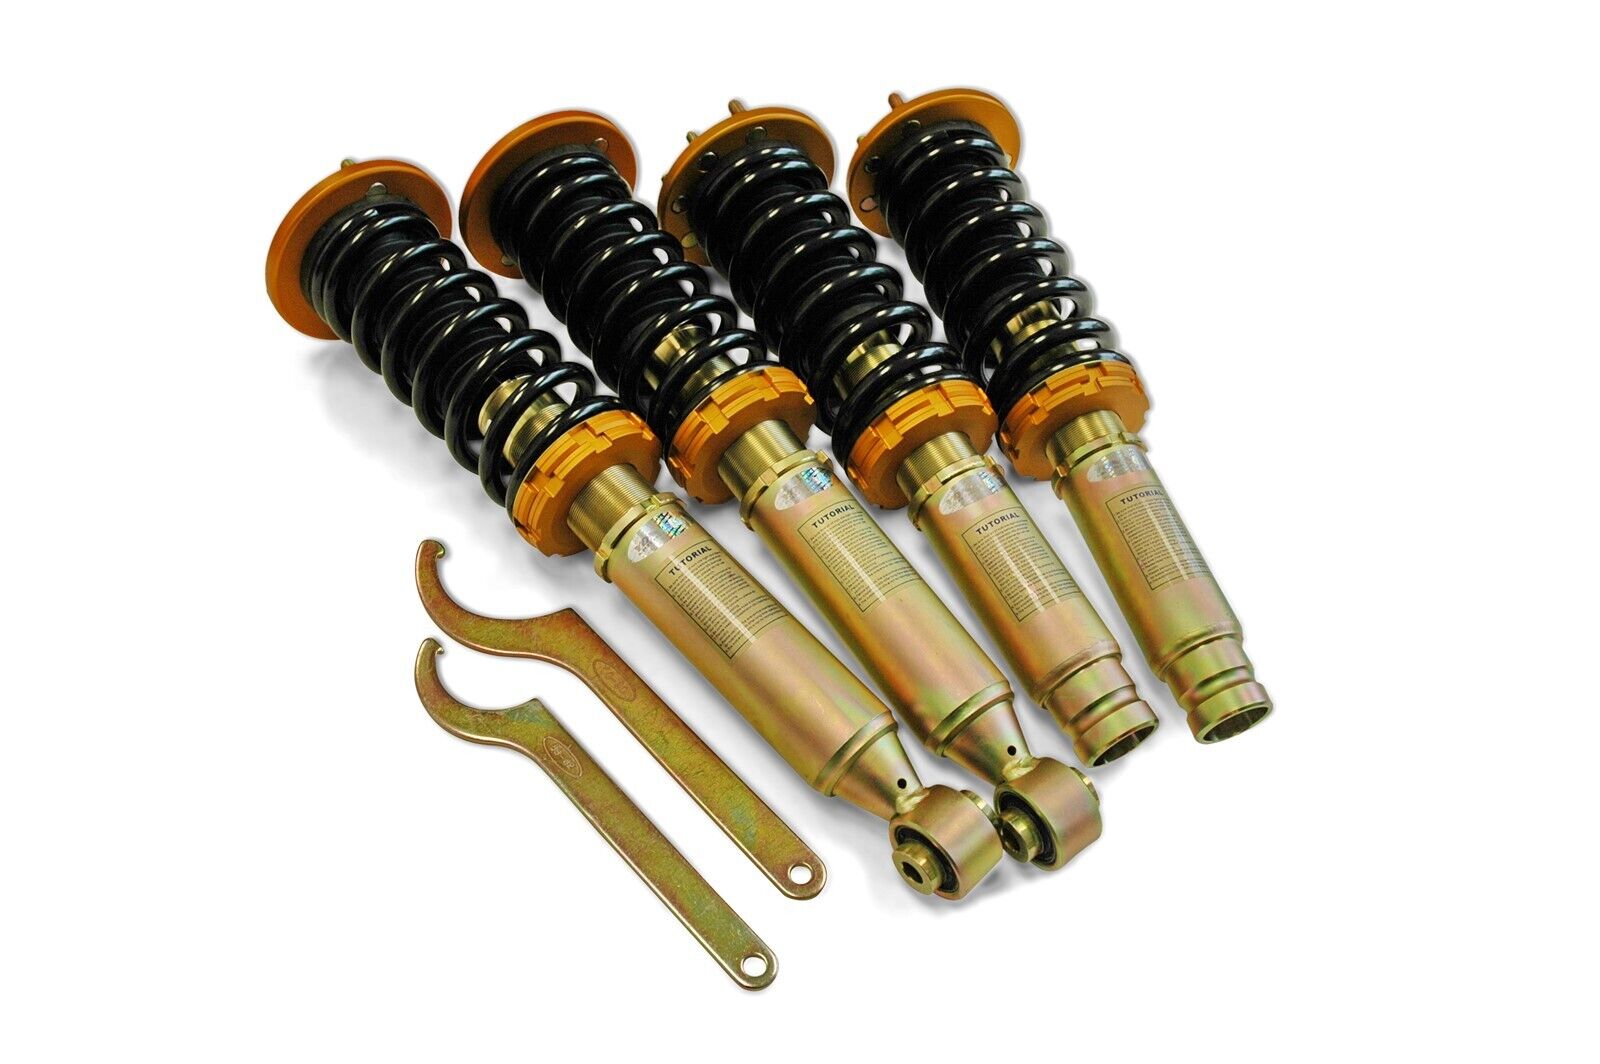 Yonaka ACURA TL Coilovers Suspension Shocks Struts Springs Set Kit for 2004-2008